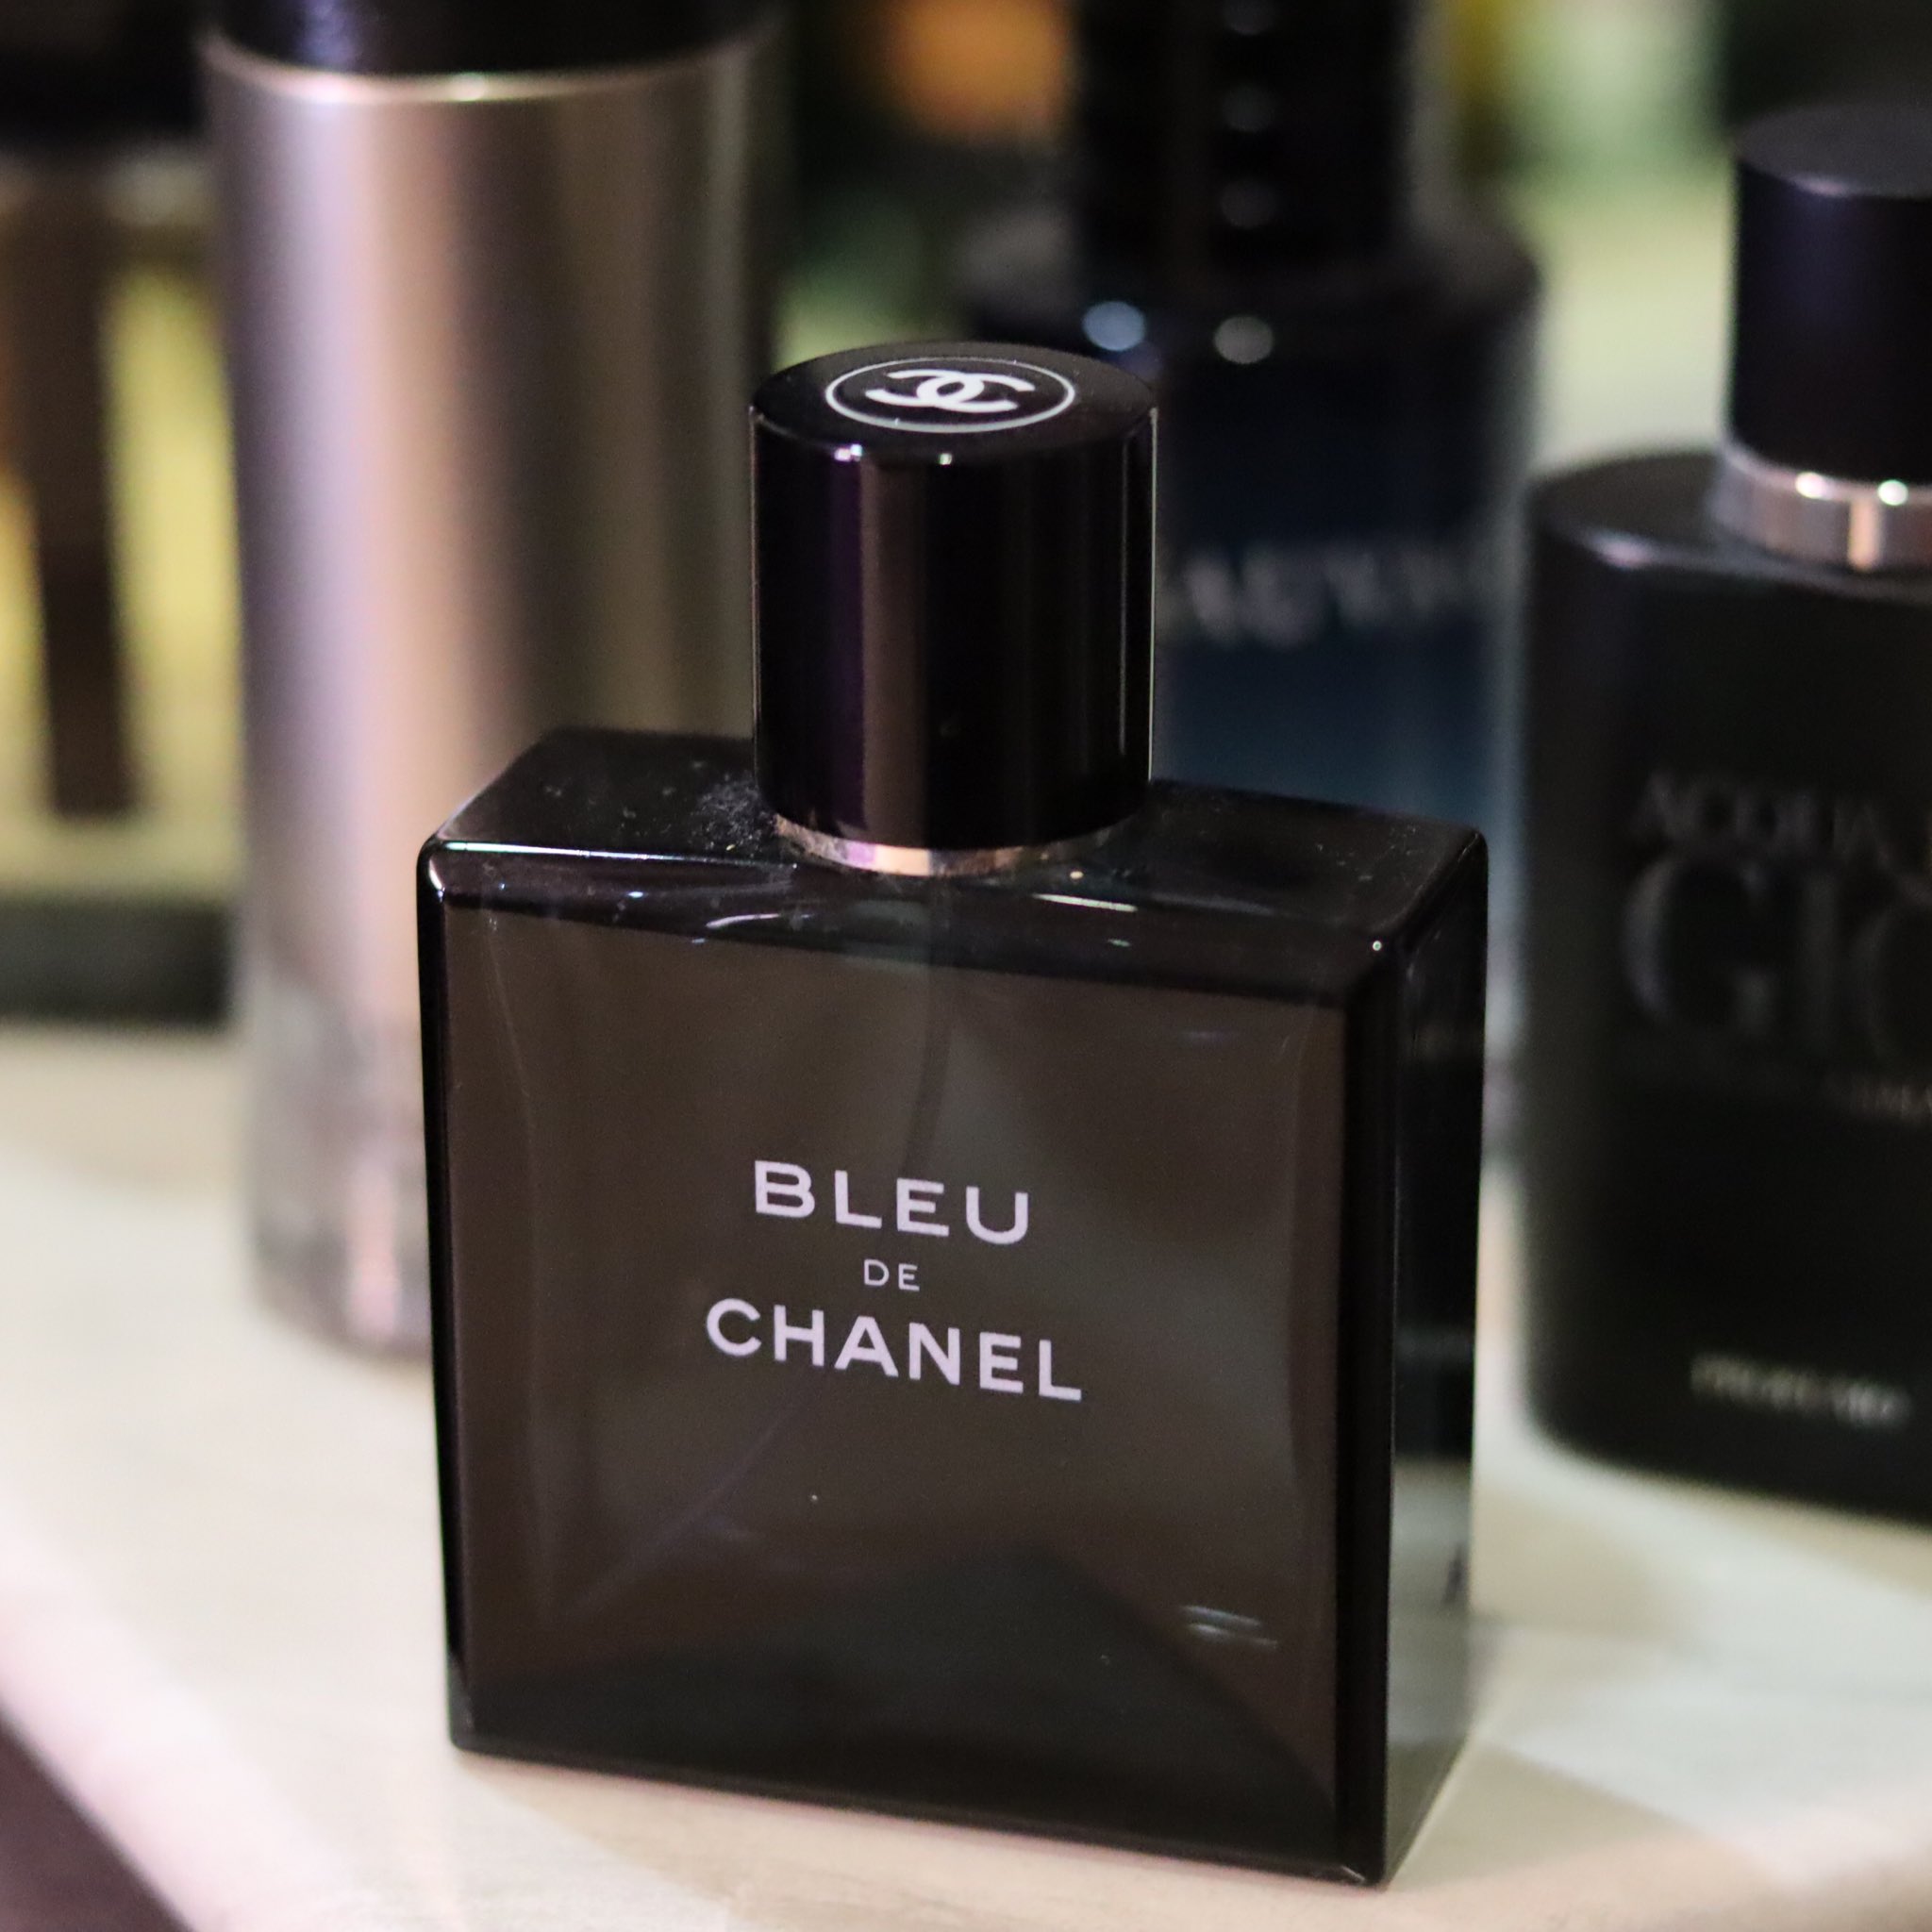 FARITH on Twitter: BLEU DE CHANEL EDT KING OF BLUE FRAGRANCE. Anytime, anywhere, any mmg 10/10. fresh zesty lemon &amp; grapefruit in the opening, with a powerful dominant